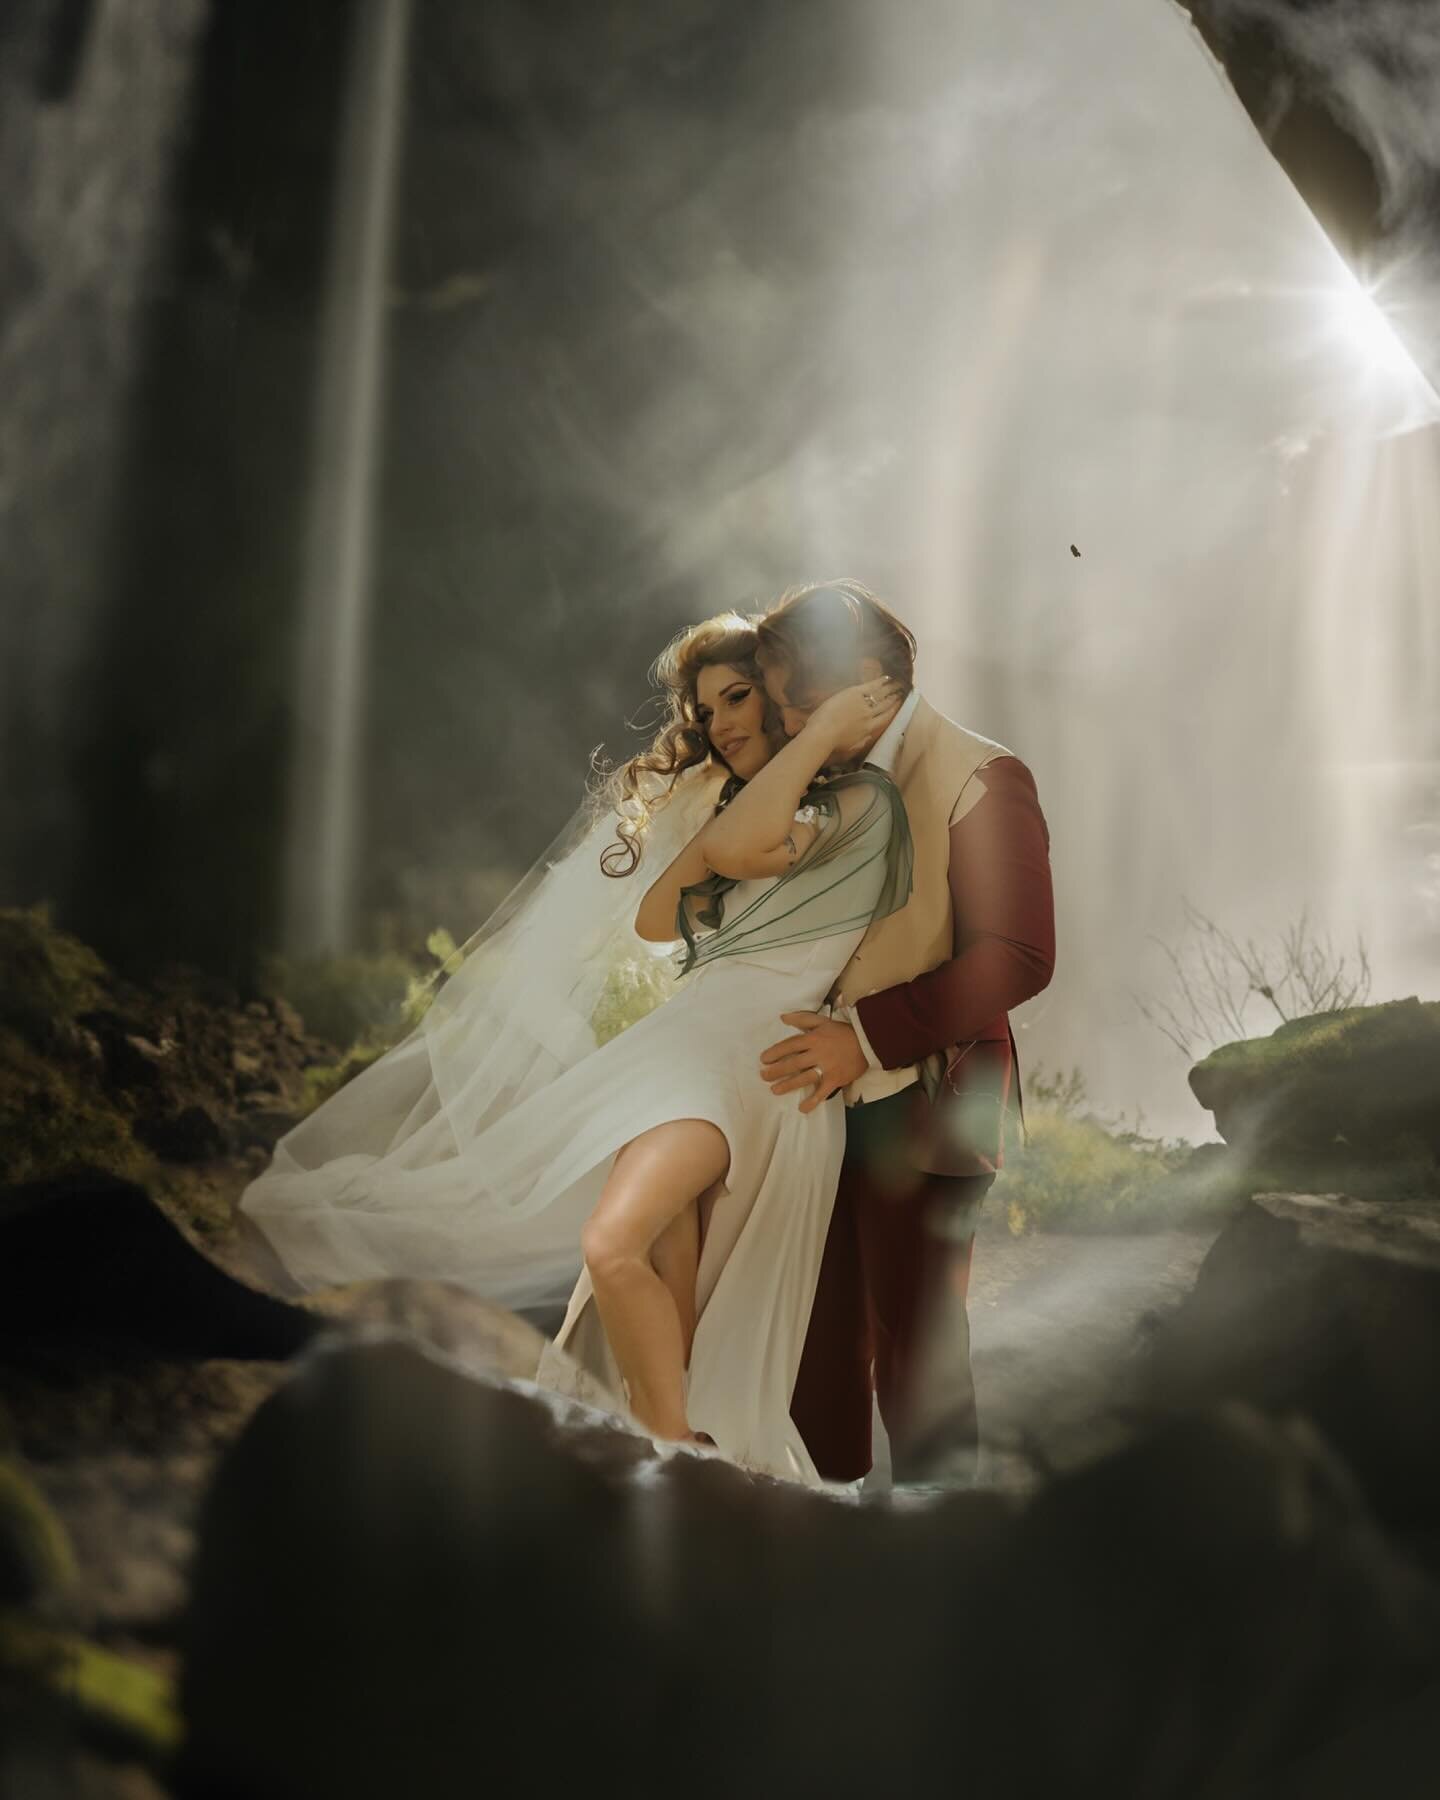 30 hours of Compositing small images and some ai keywords in harmony with some older wedding poses. I&rsquo;m going to make these while I keep calm and carry on the next couple months.